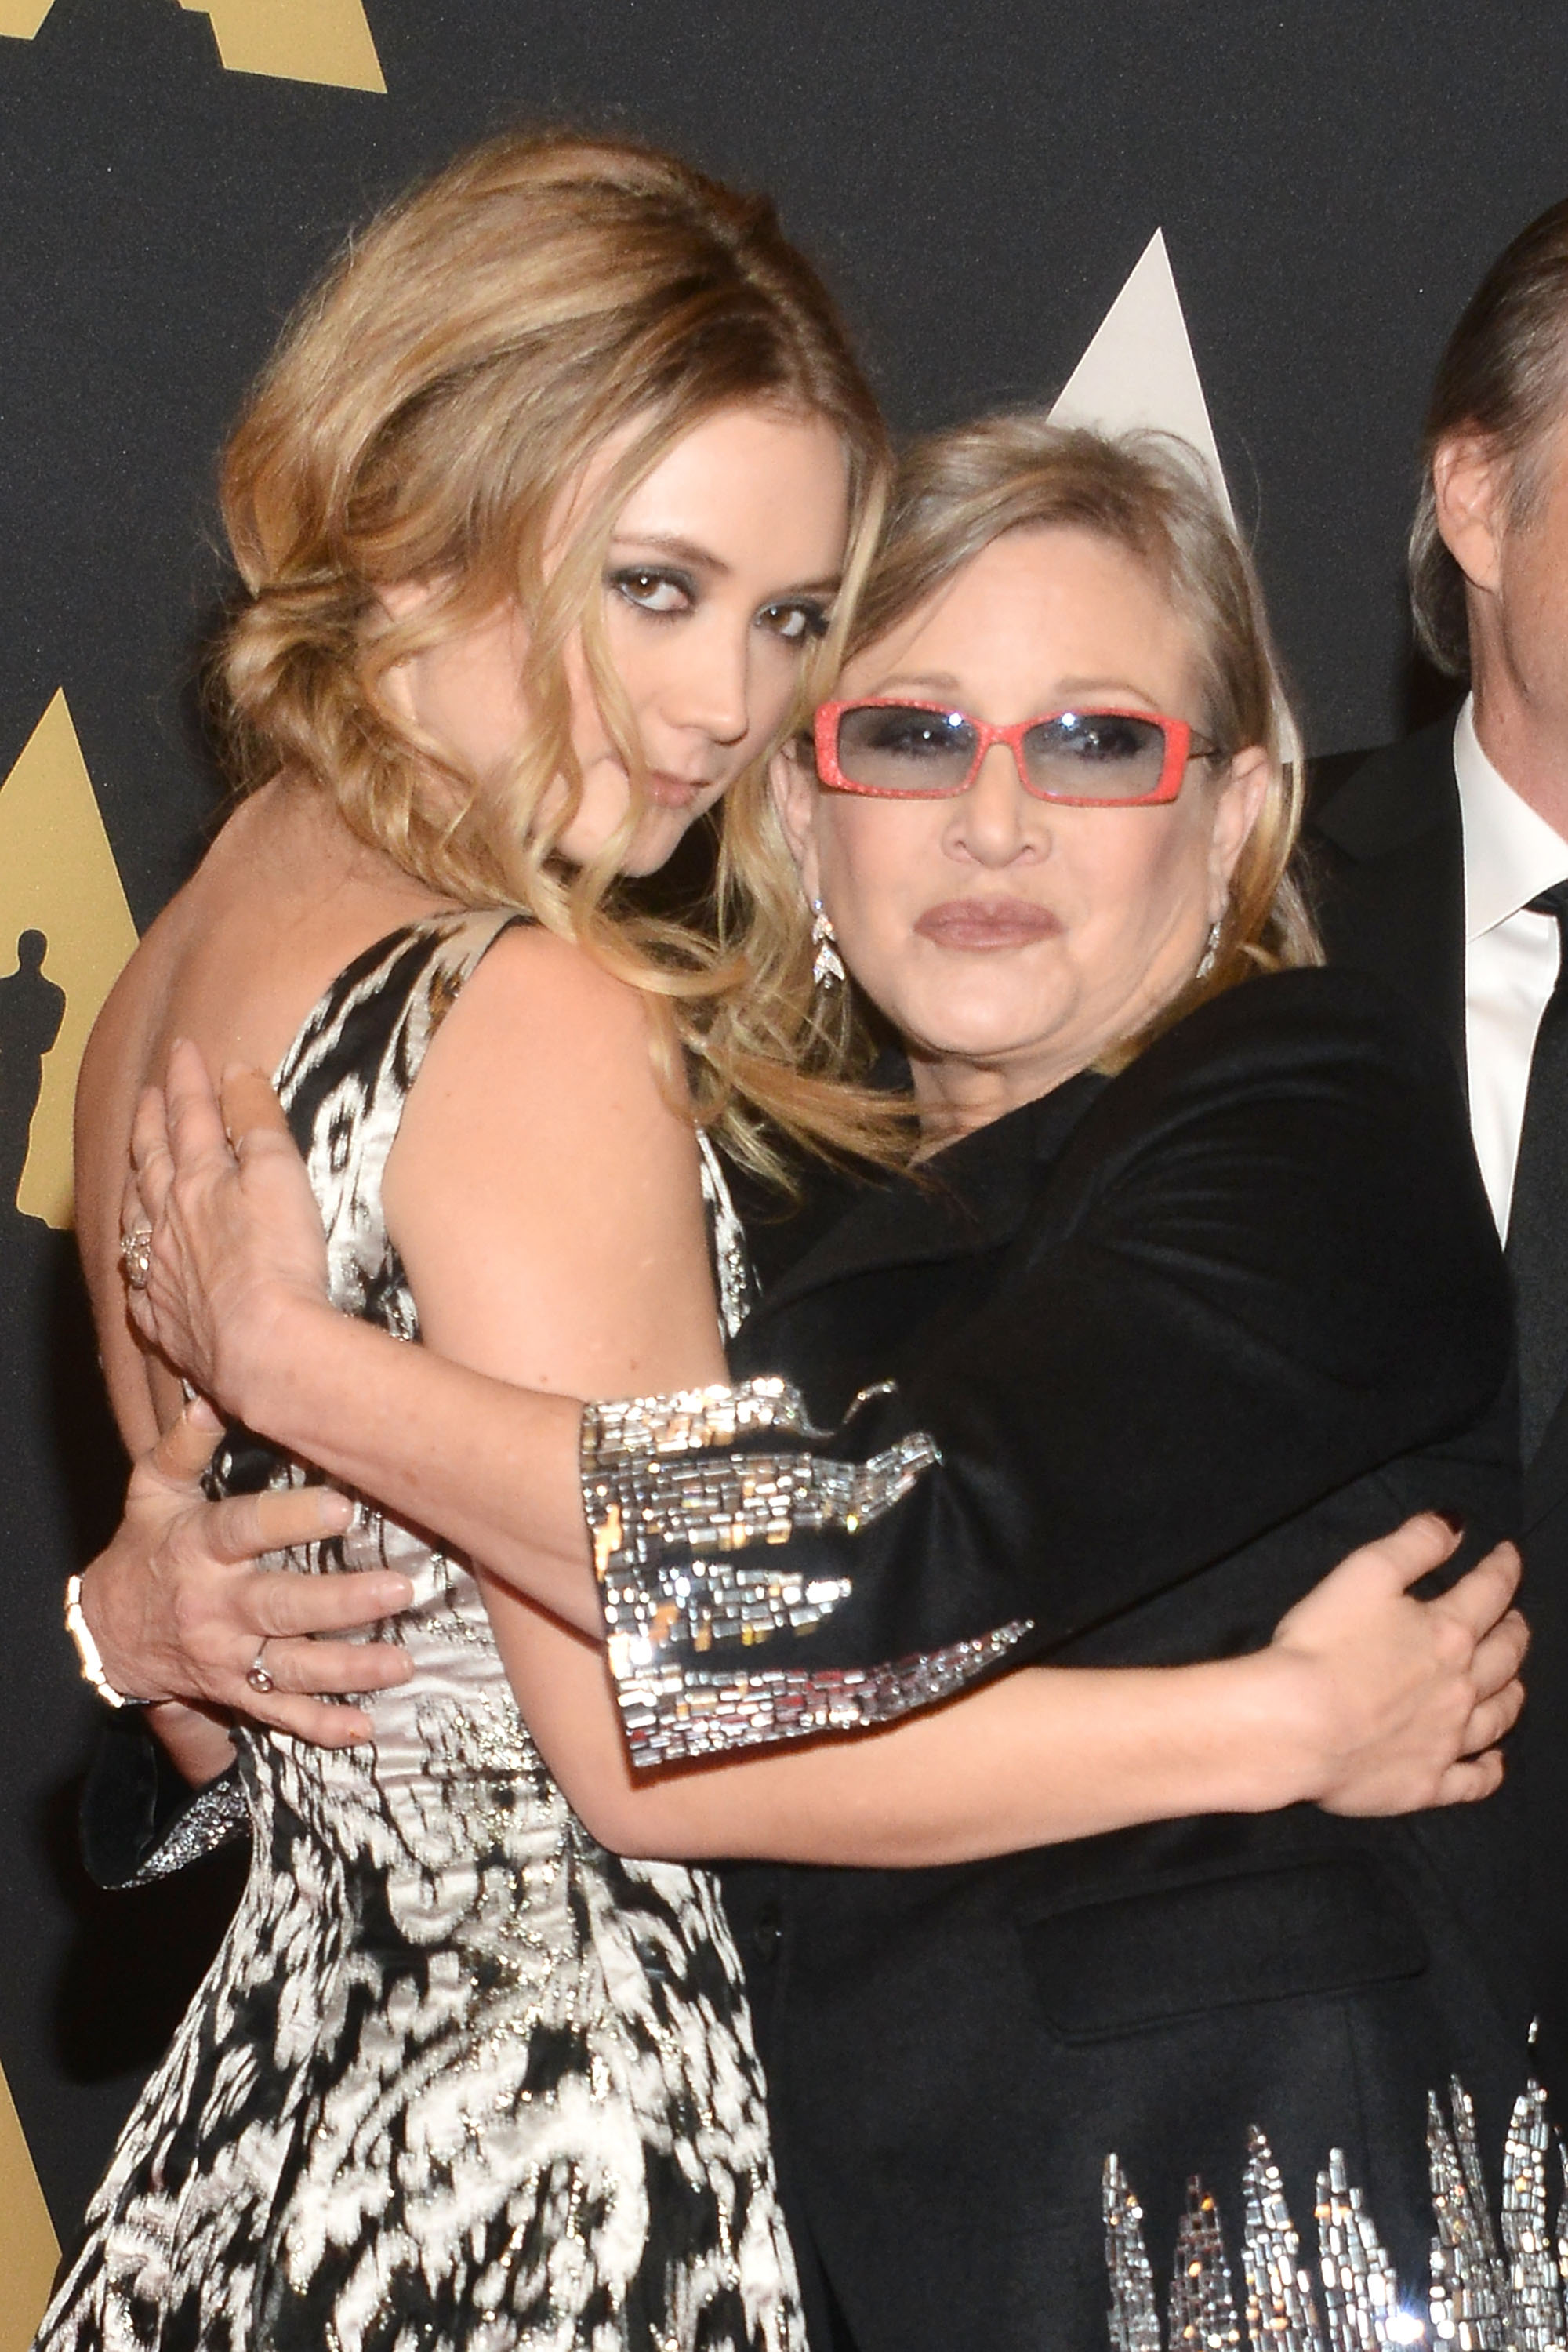 Billie Lourd and Carrie Fisher